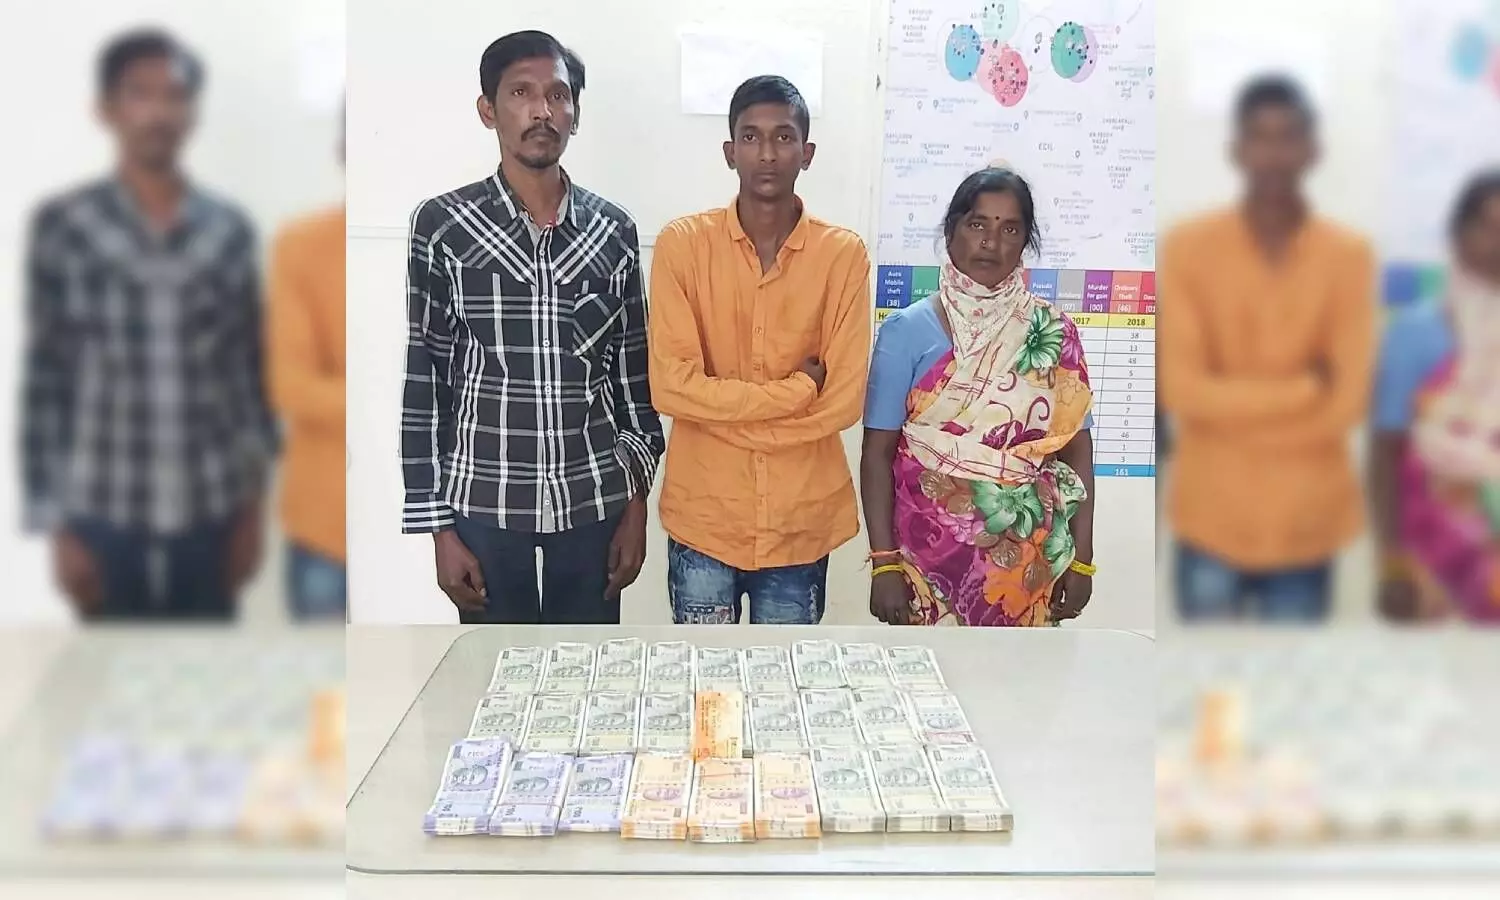 3 arrested for robbing man of Rs. 12L after stealing ATM card